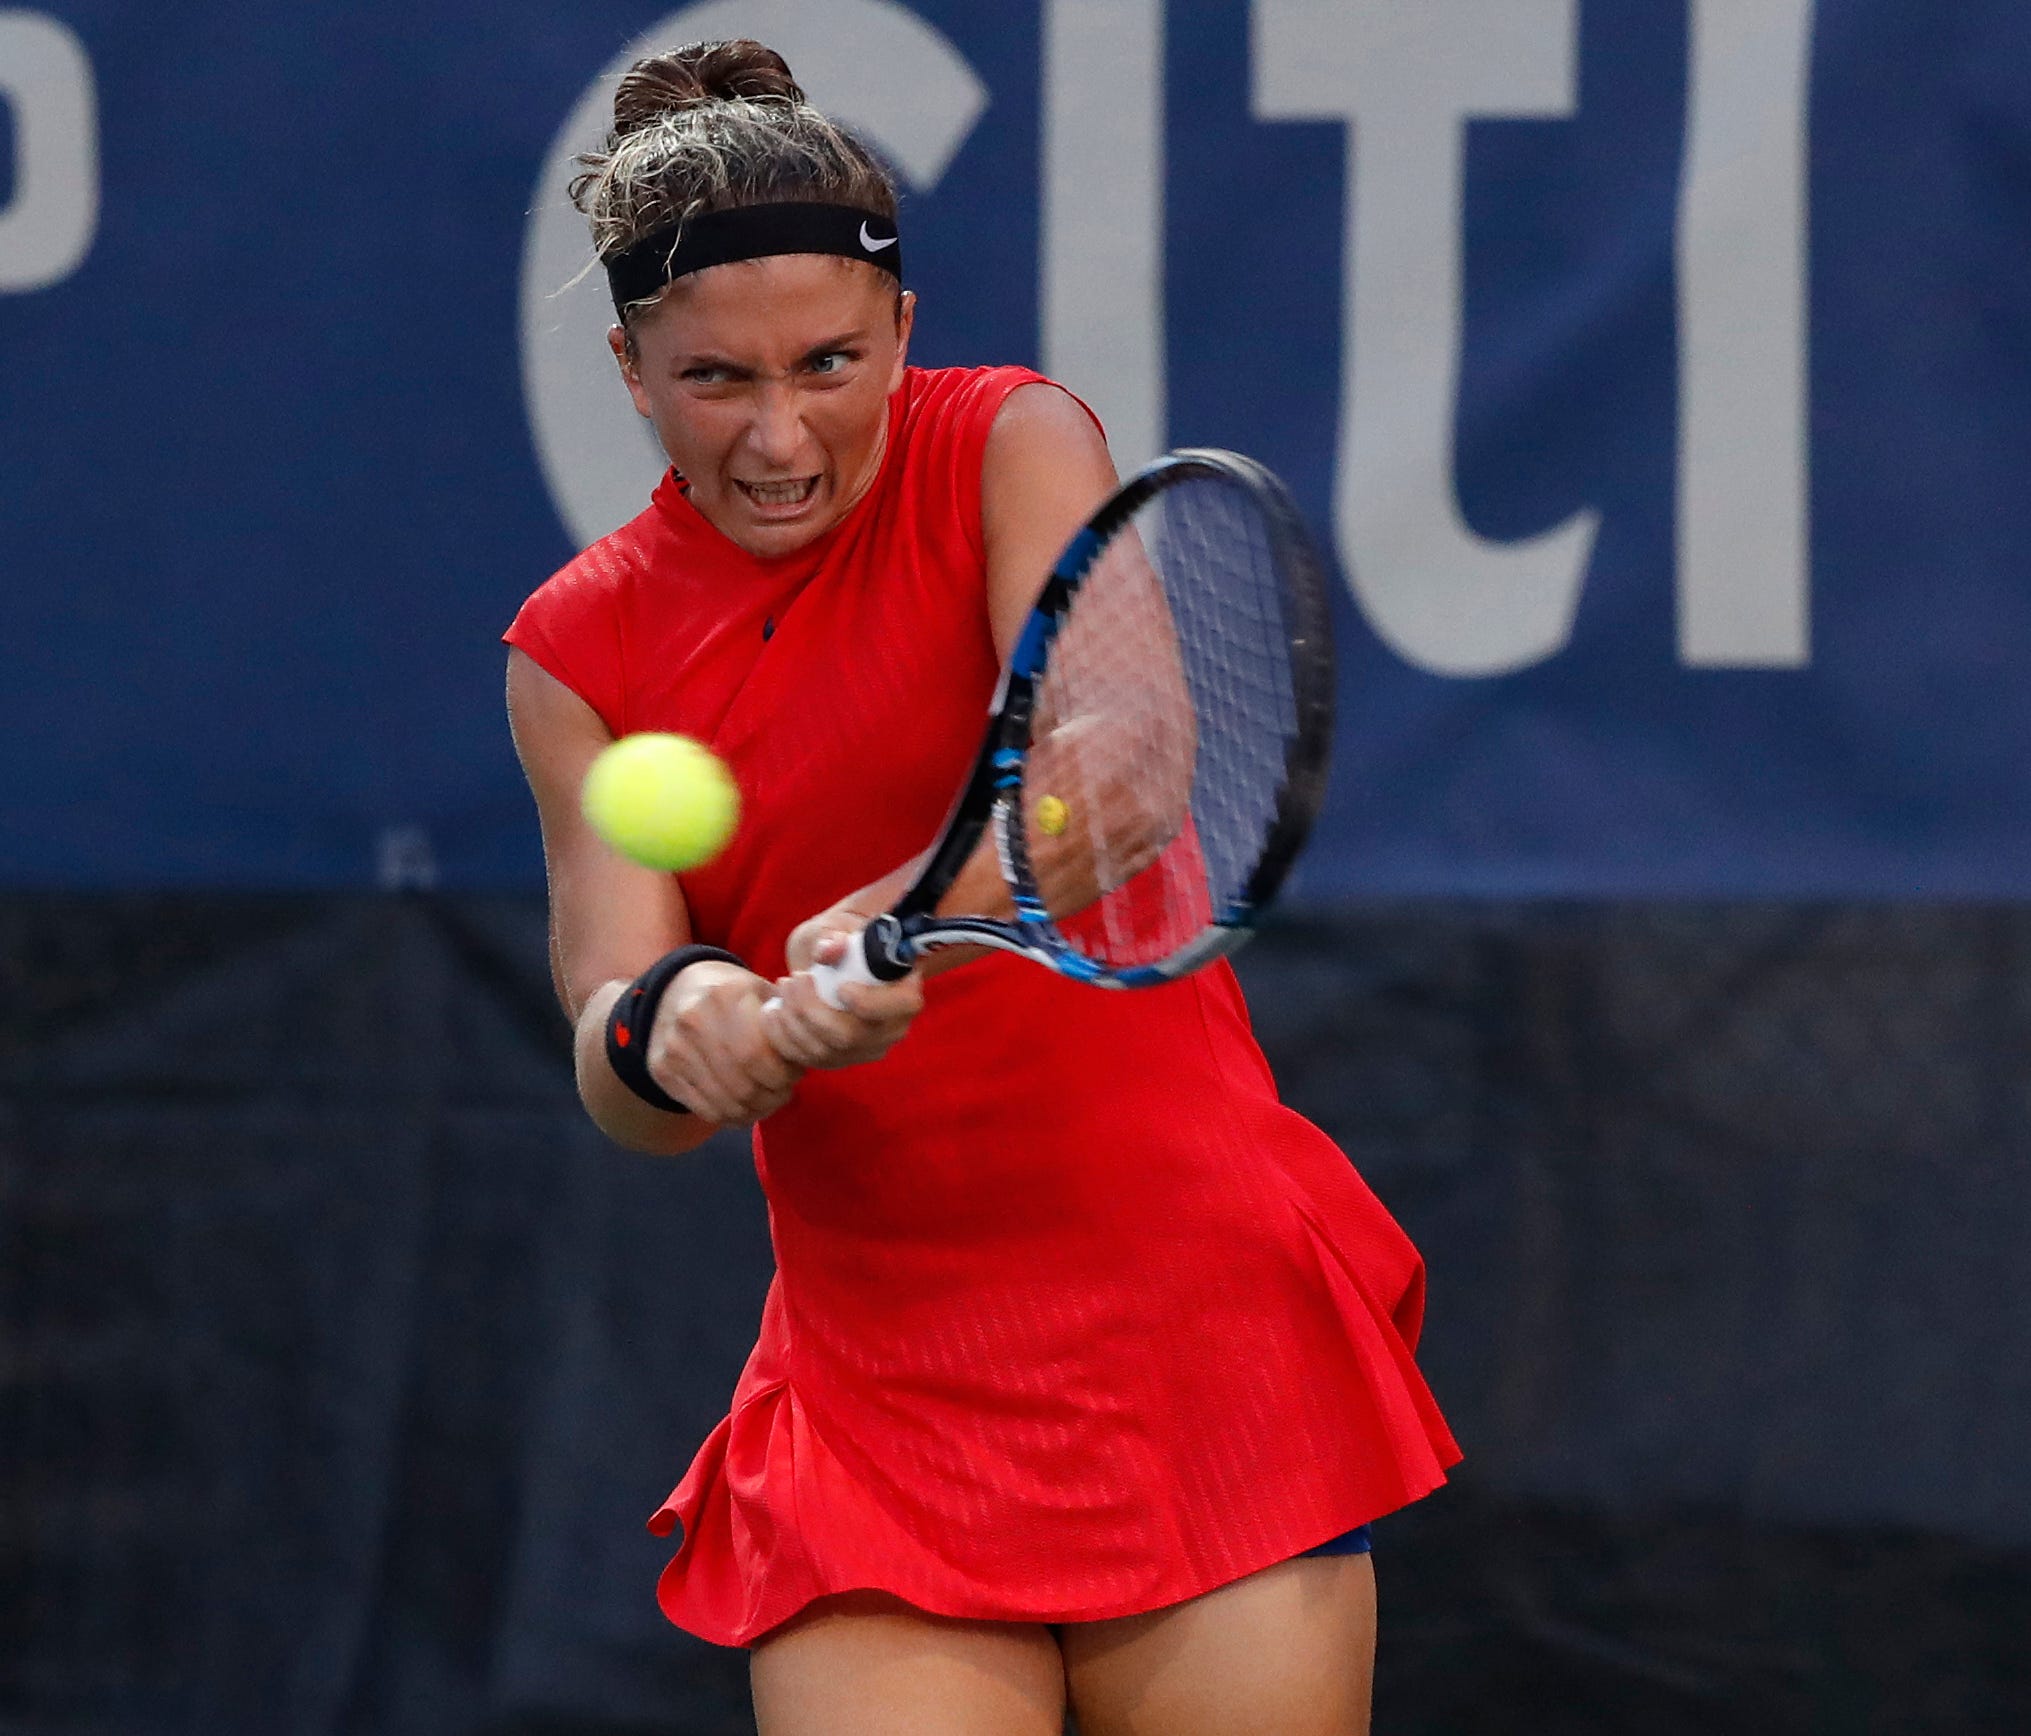 Sara Errani of Italy hits a backhand against Risa Ozaki of Japan (not pictured) on day one of the Citi Open at Fitzgerald Tennis Center. Errani won 7-6(0), 6-2 on July 31.